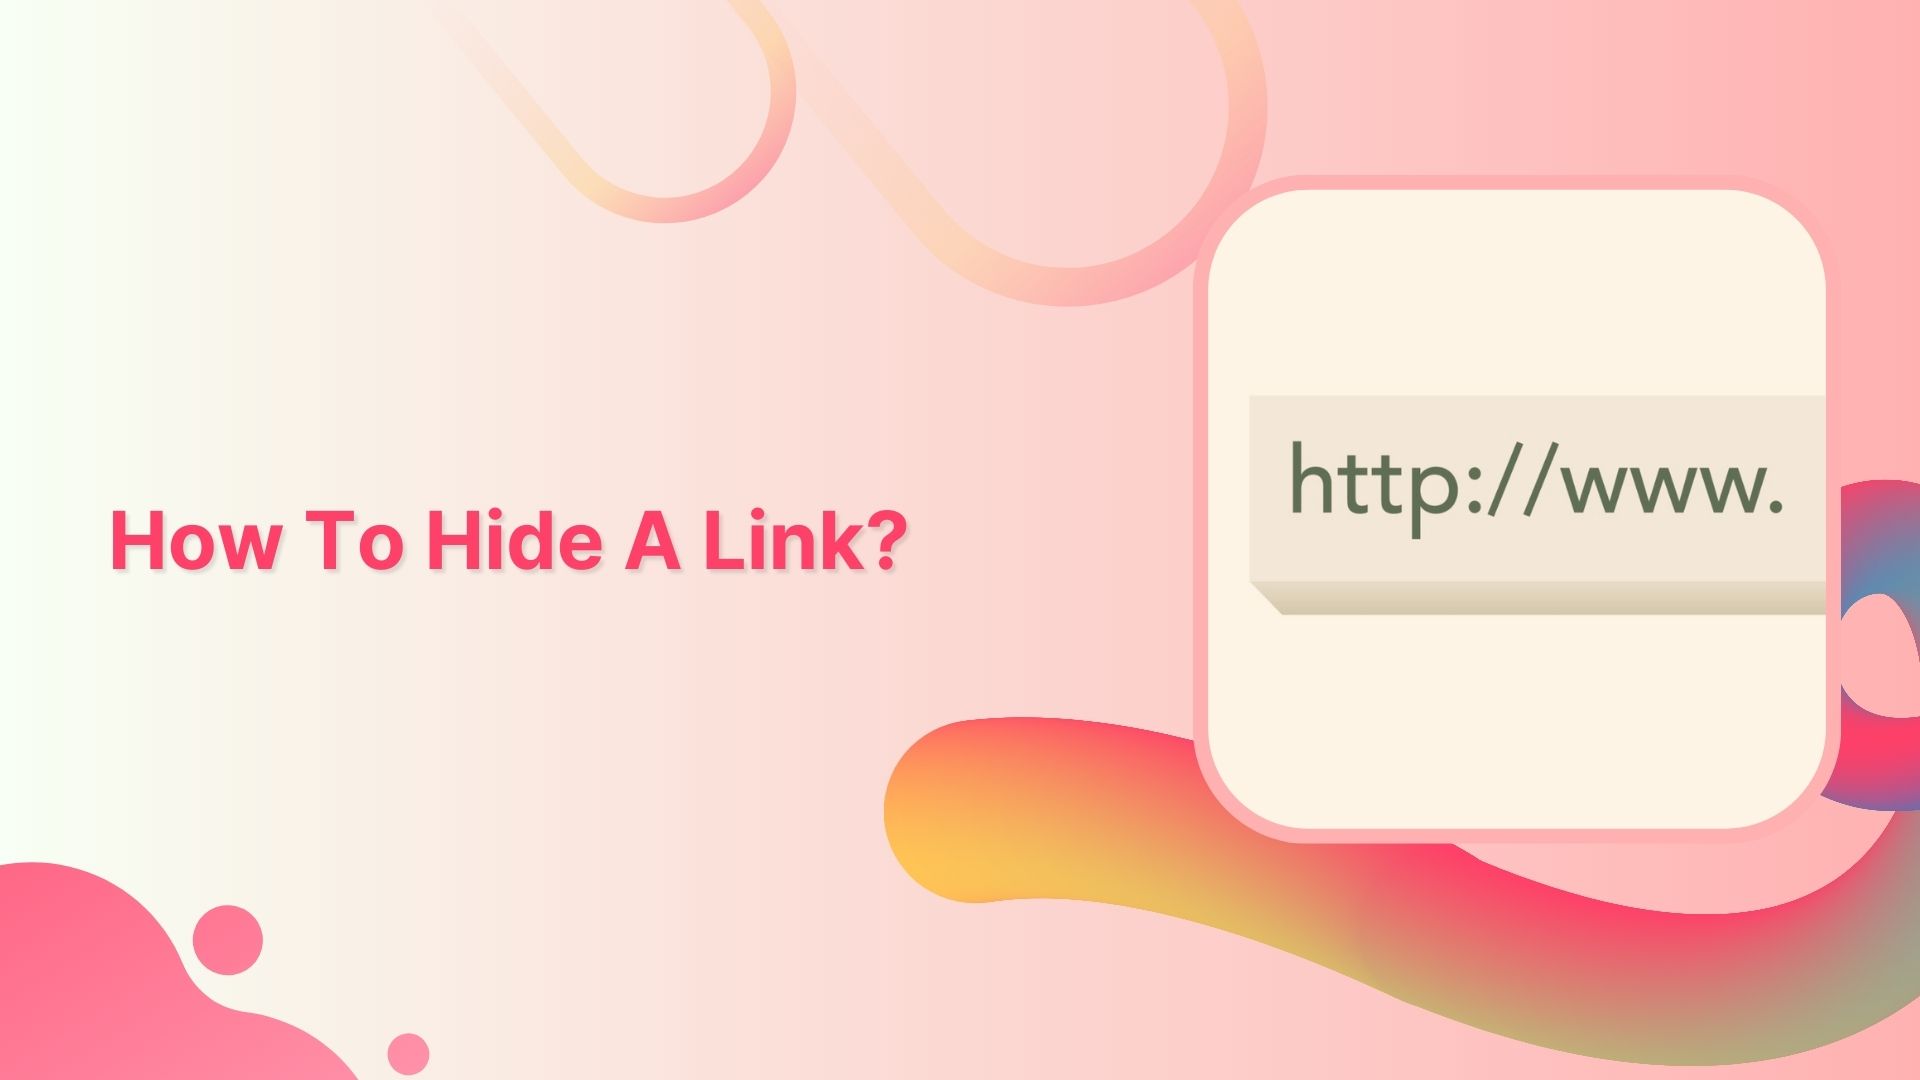 How to hide a link using a URL shortener?